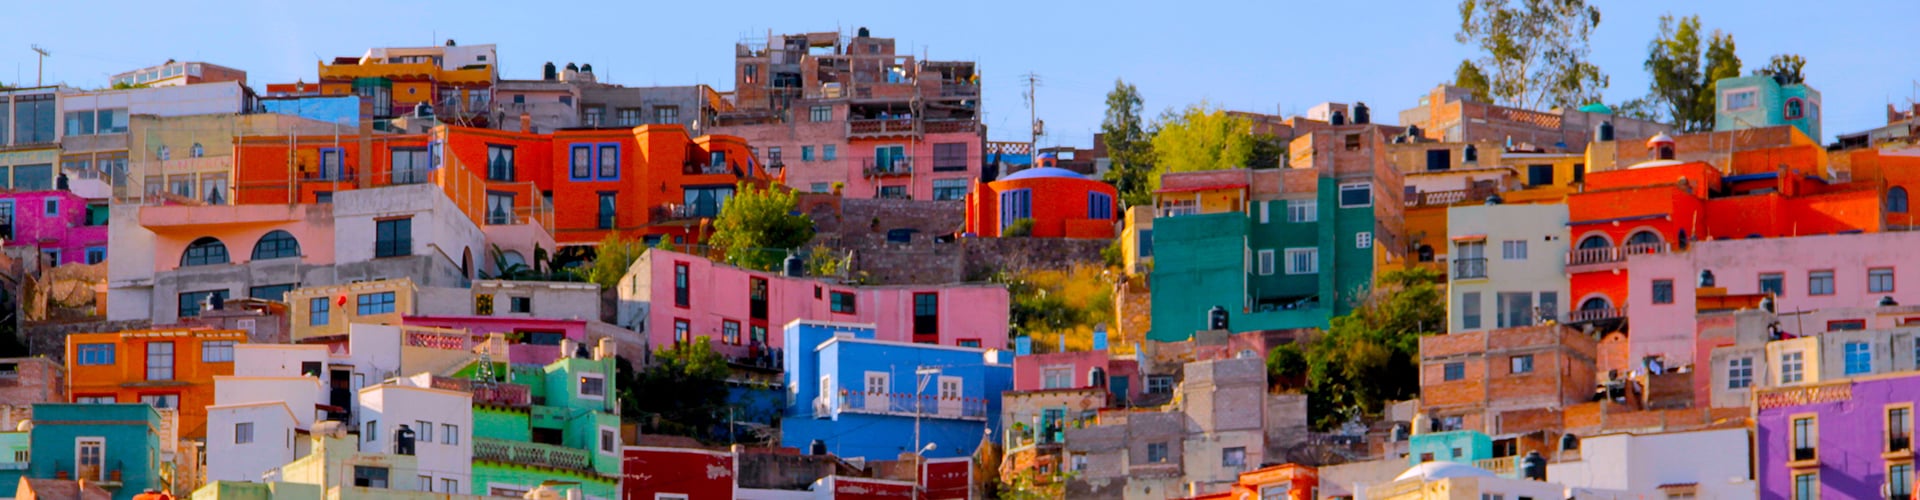 South America colorful houses on a hillside